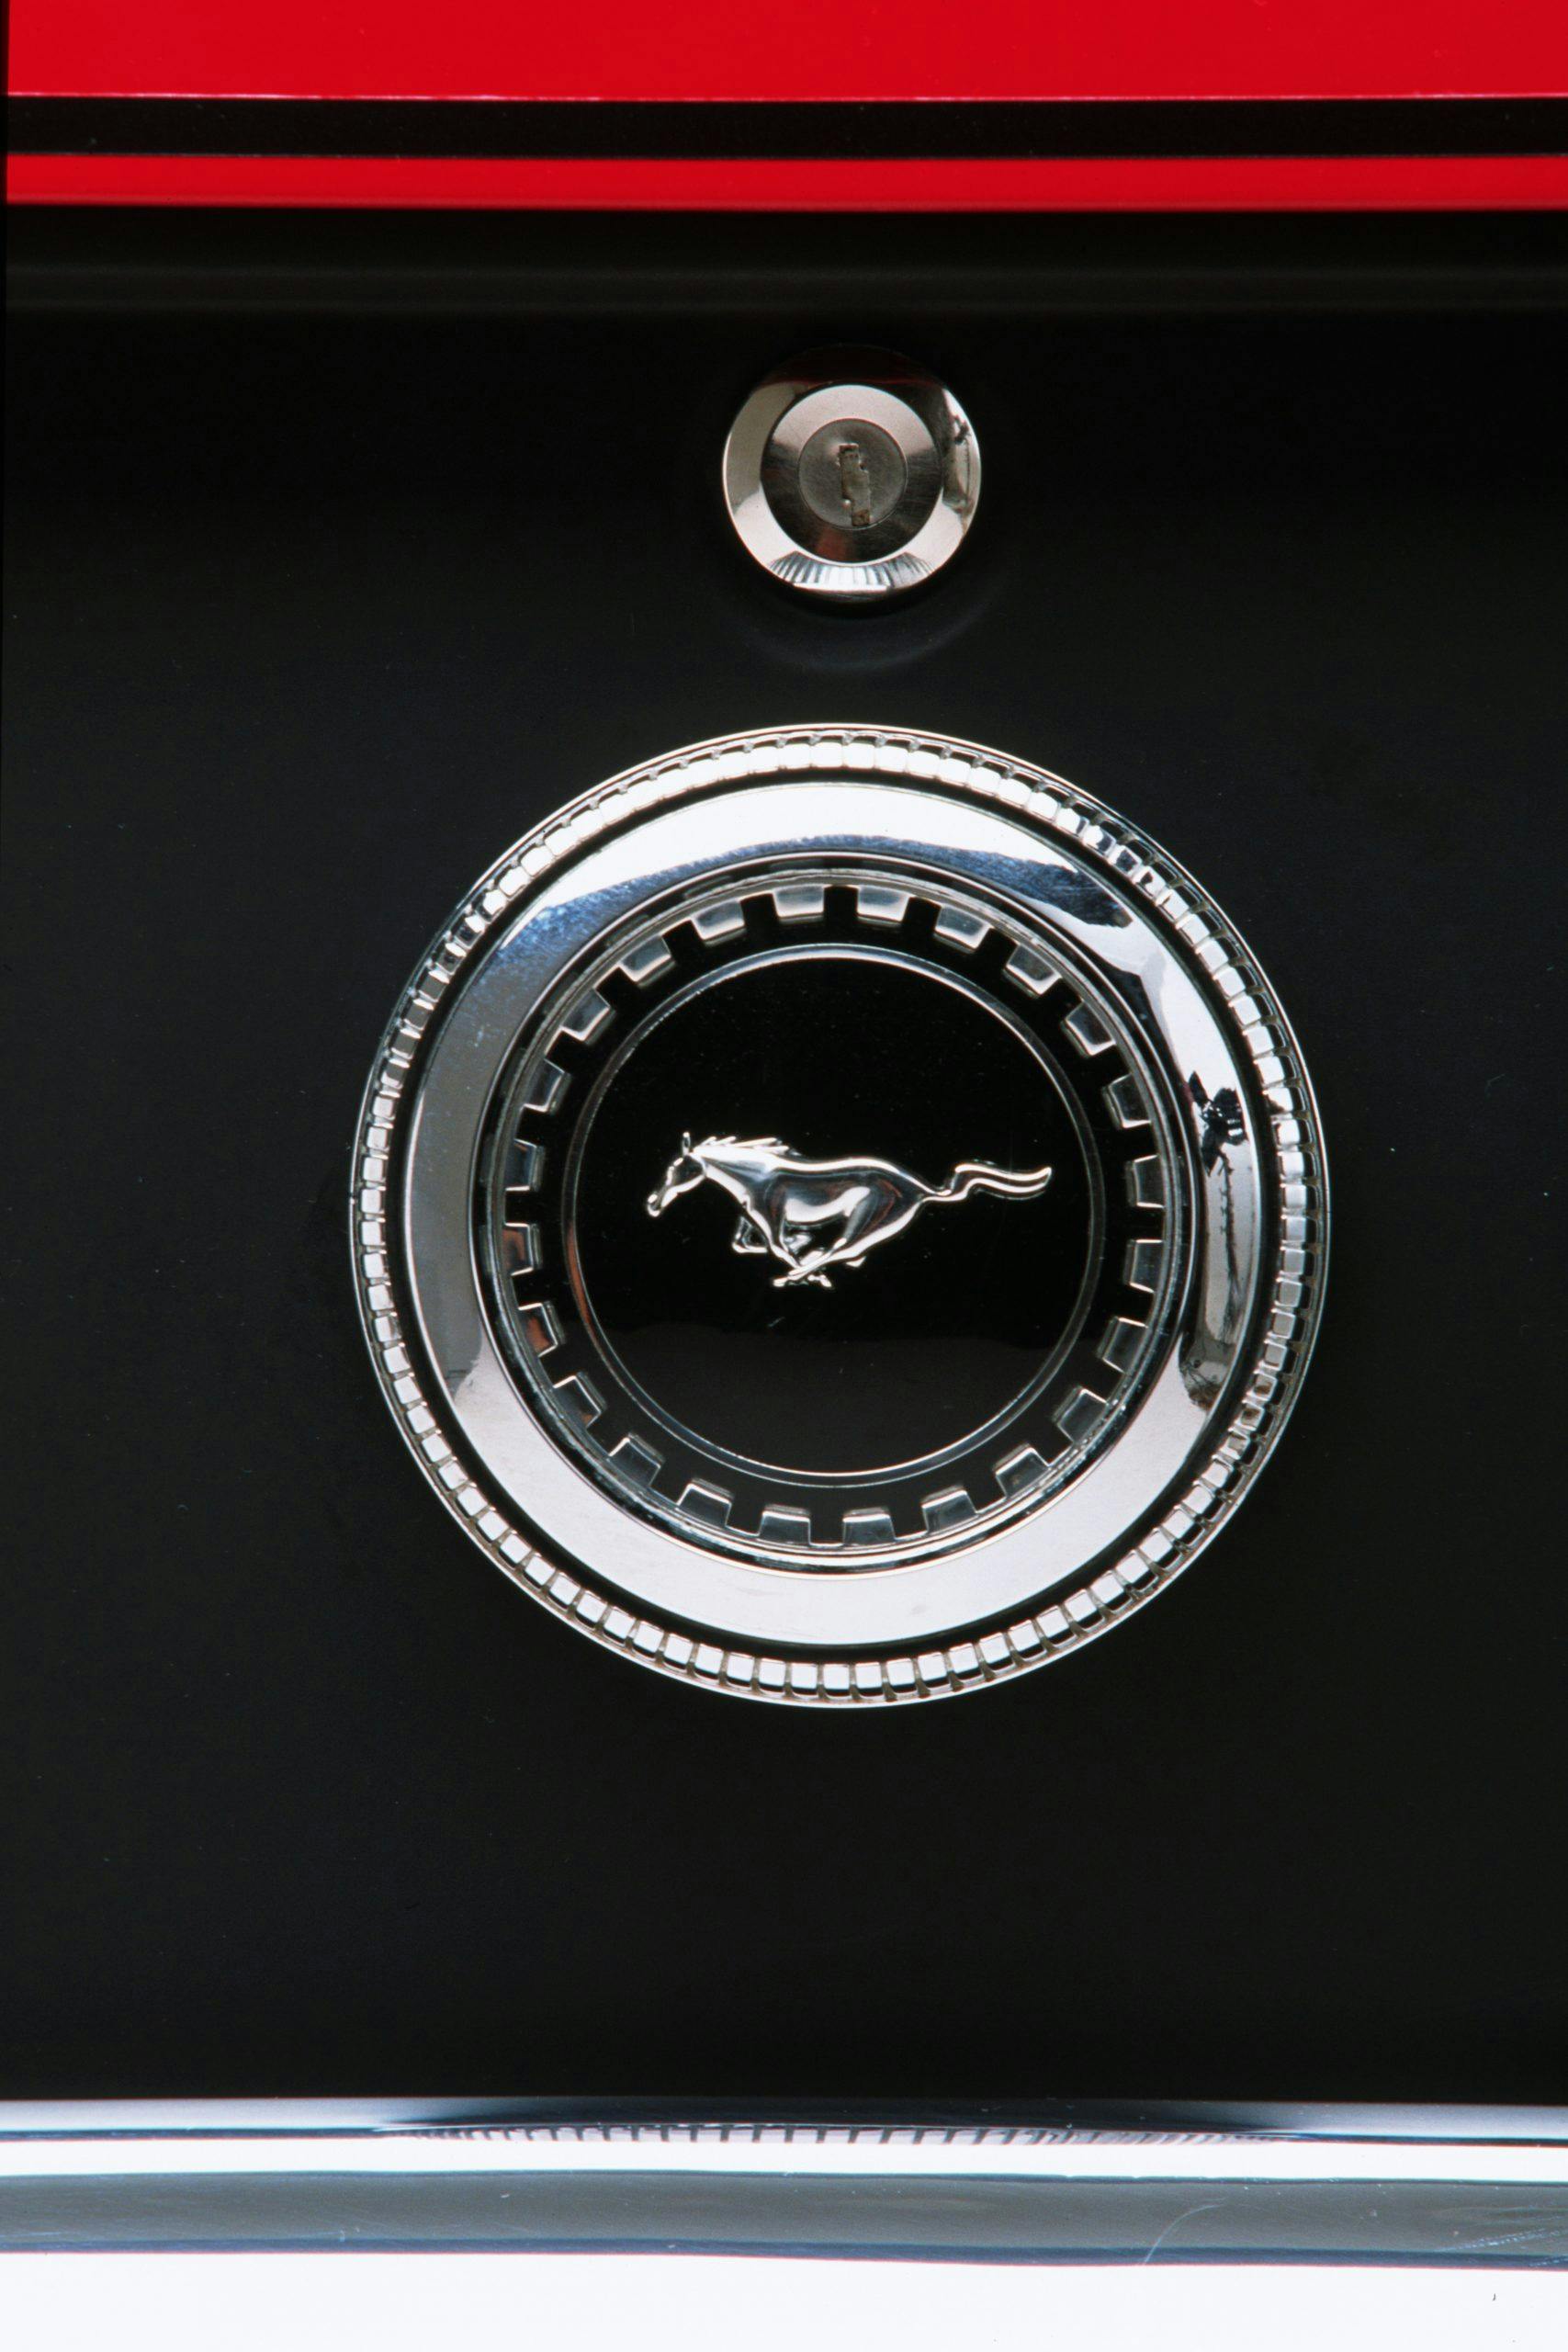 1970 Ford Mustang Mach 1 Fastback Fuel Cap